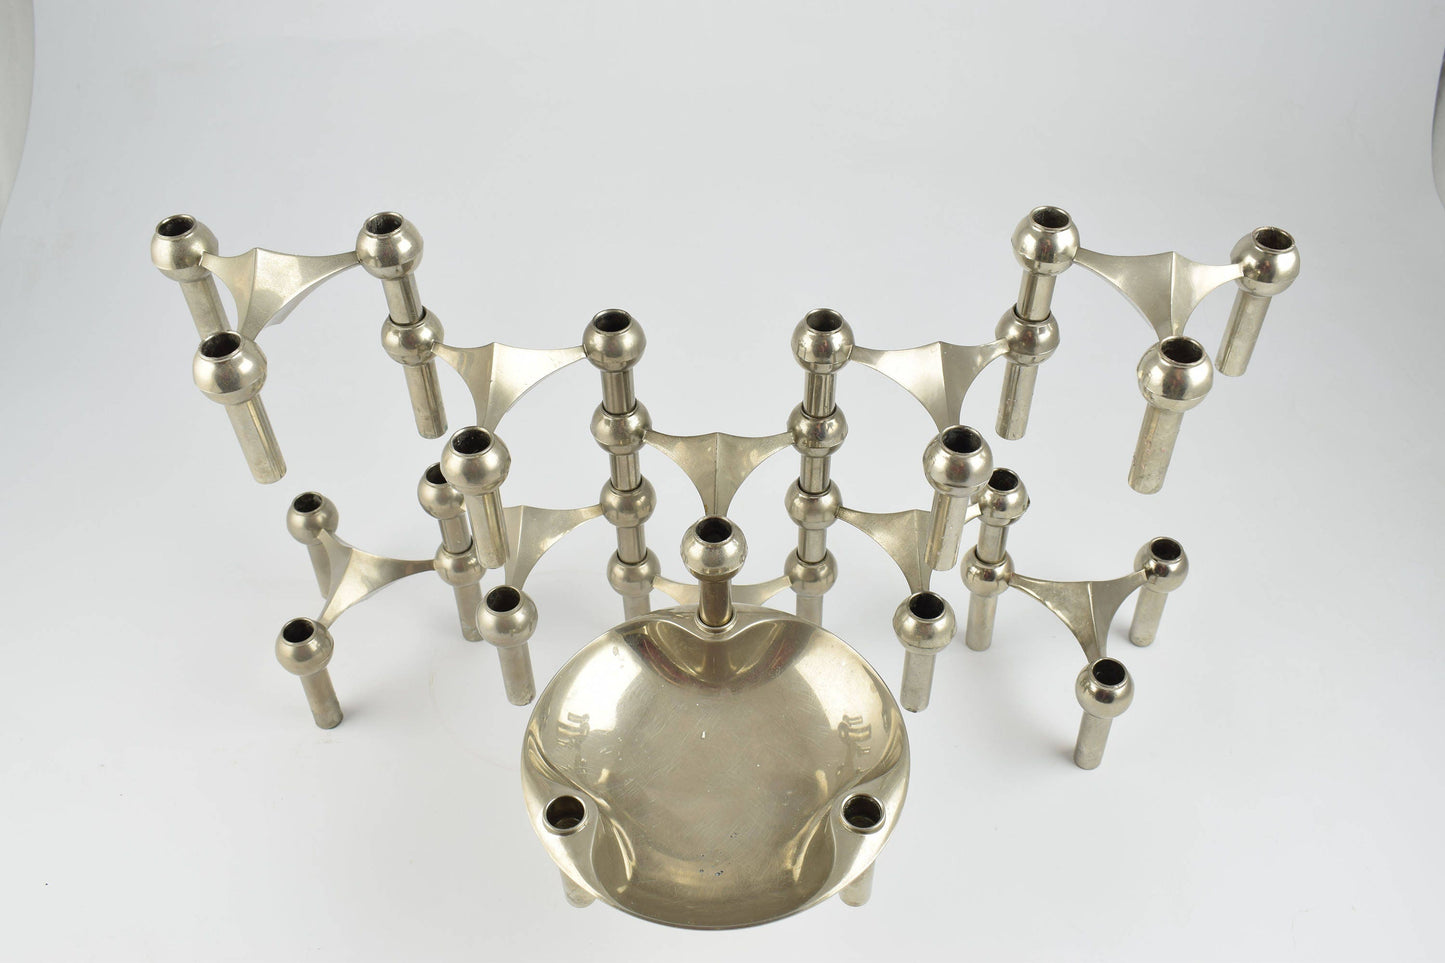 Set of 10 with bowl nagel stackable Candle holders designed by Ceasar Stoffi and Fritz Nagel and manufactured by BMF